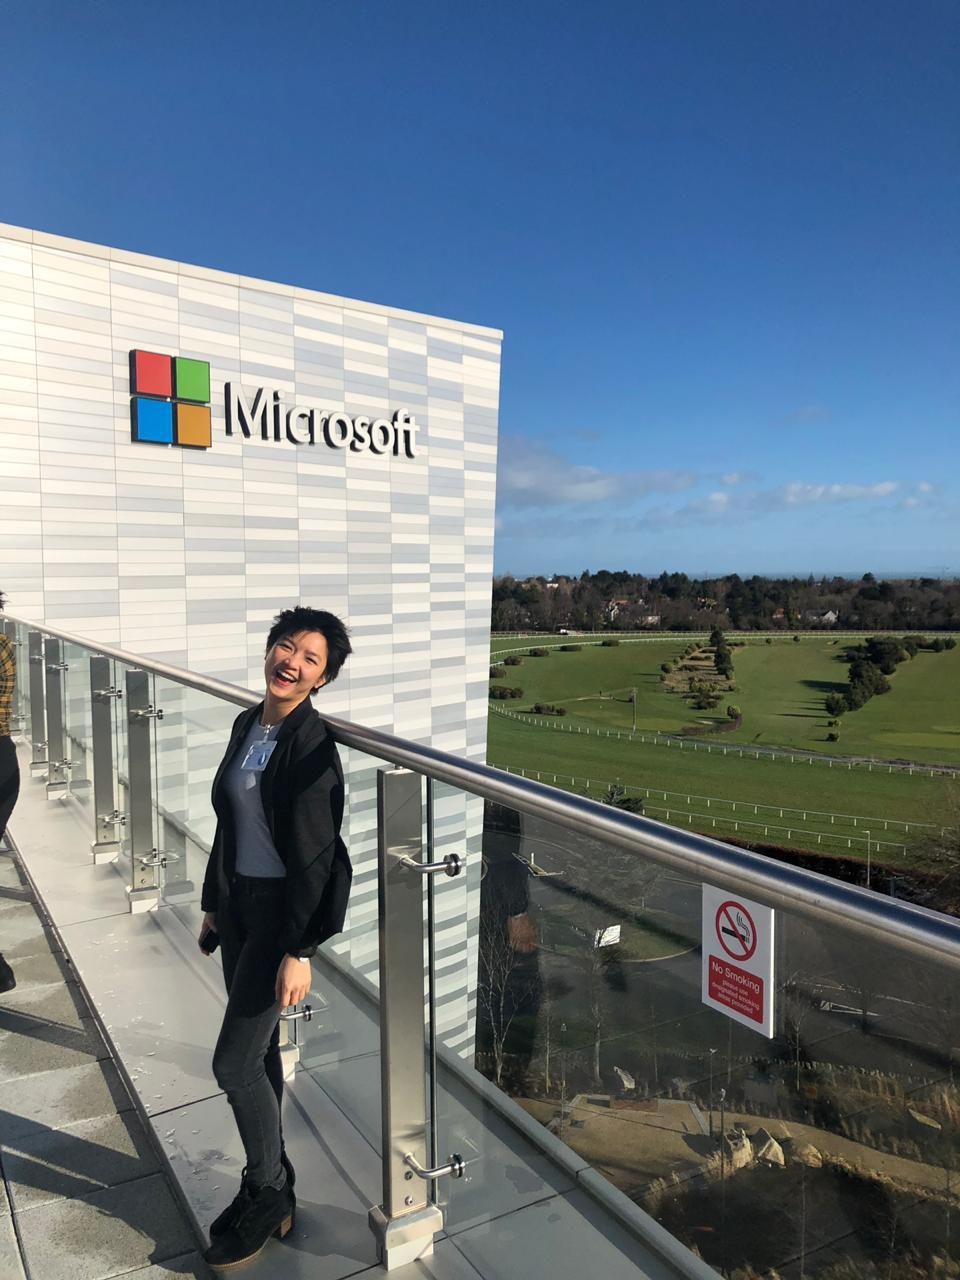 smiling woman in front of Microsoft building with blue sky and green fields in the background 